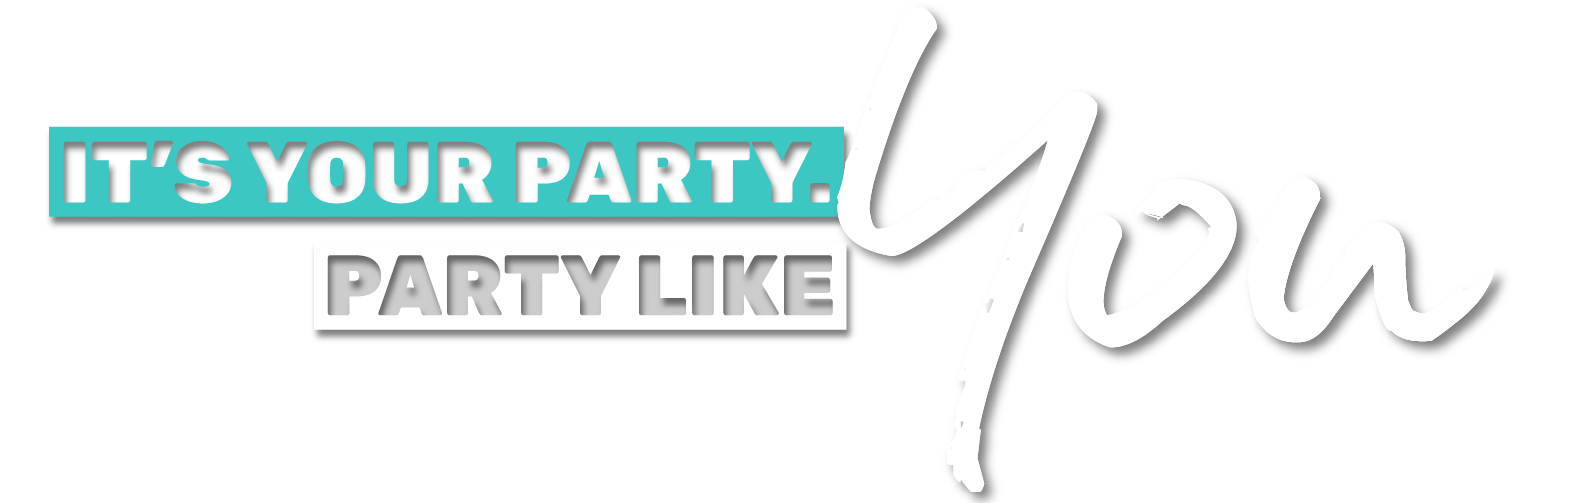 Party with Complete Wichita